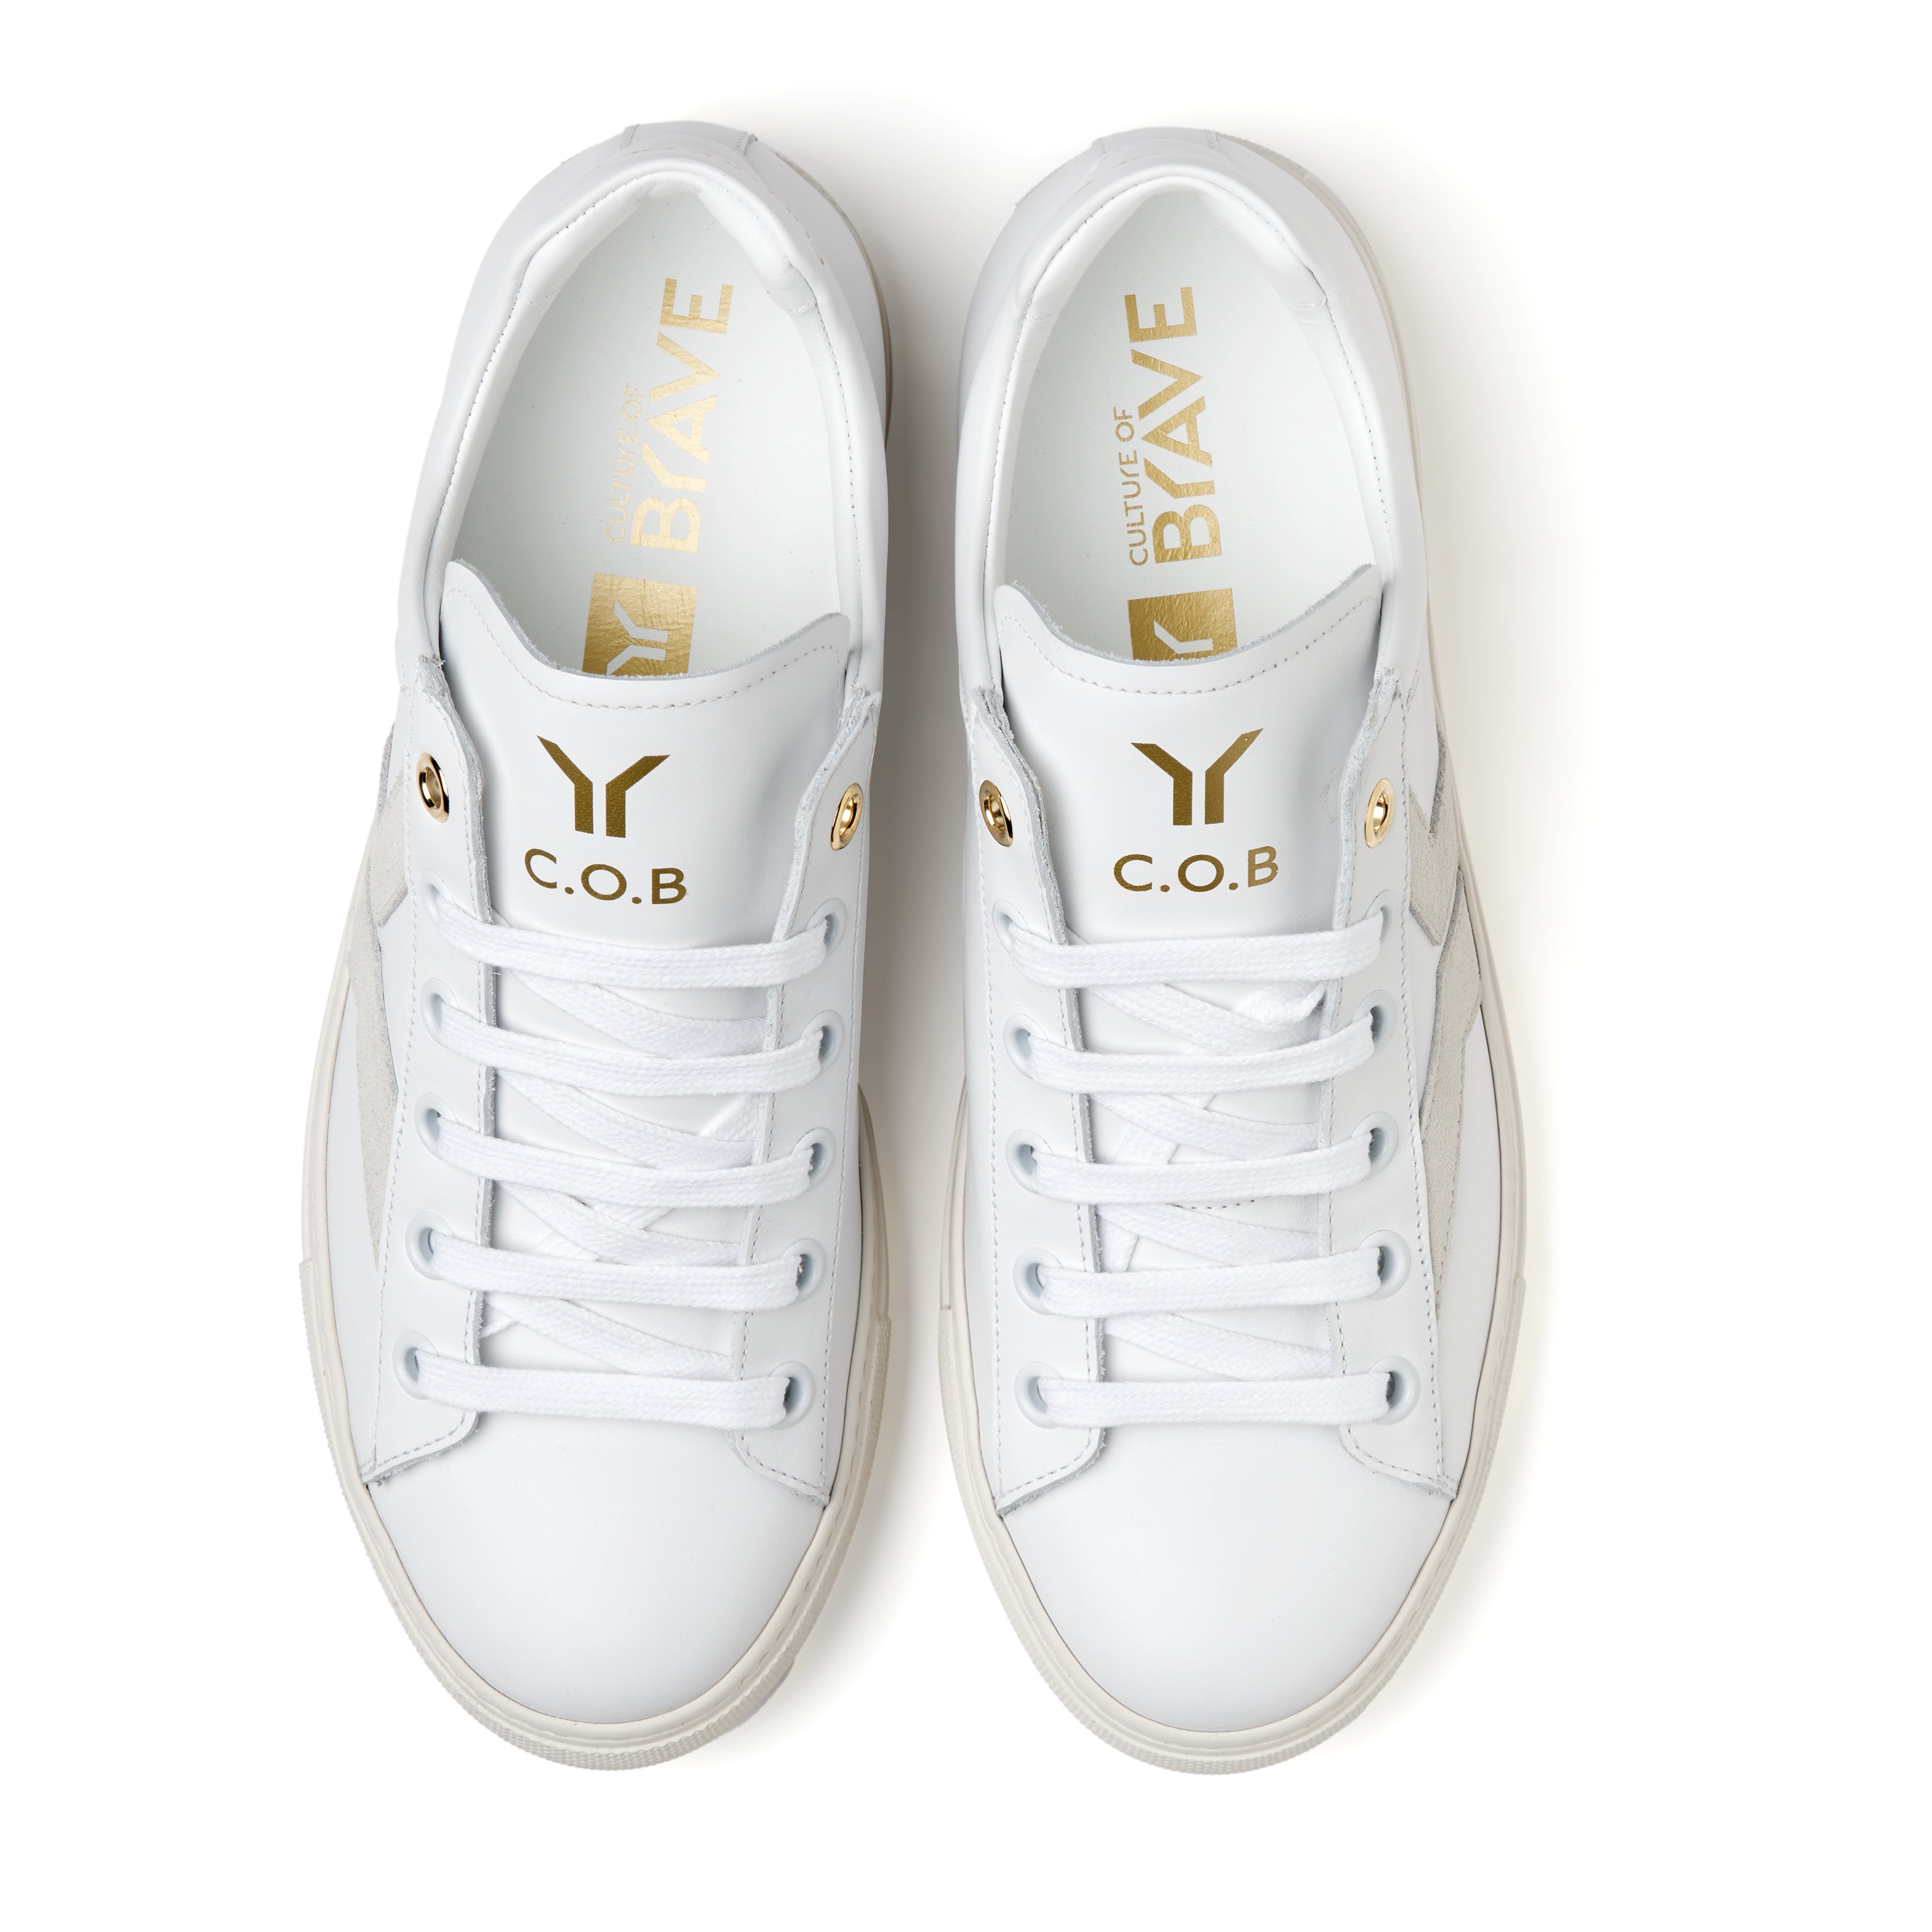 Courage S31 Men White leather offwhite wing low cut